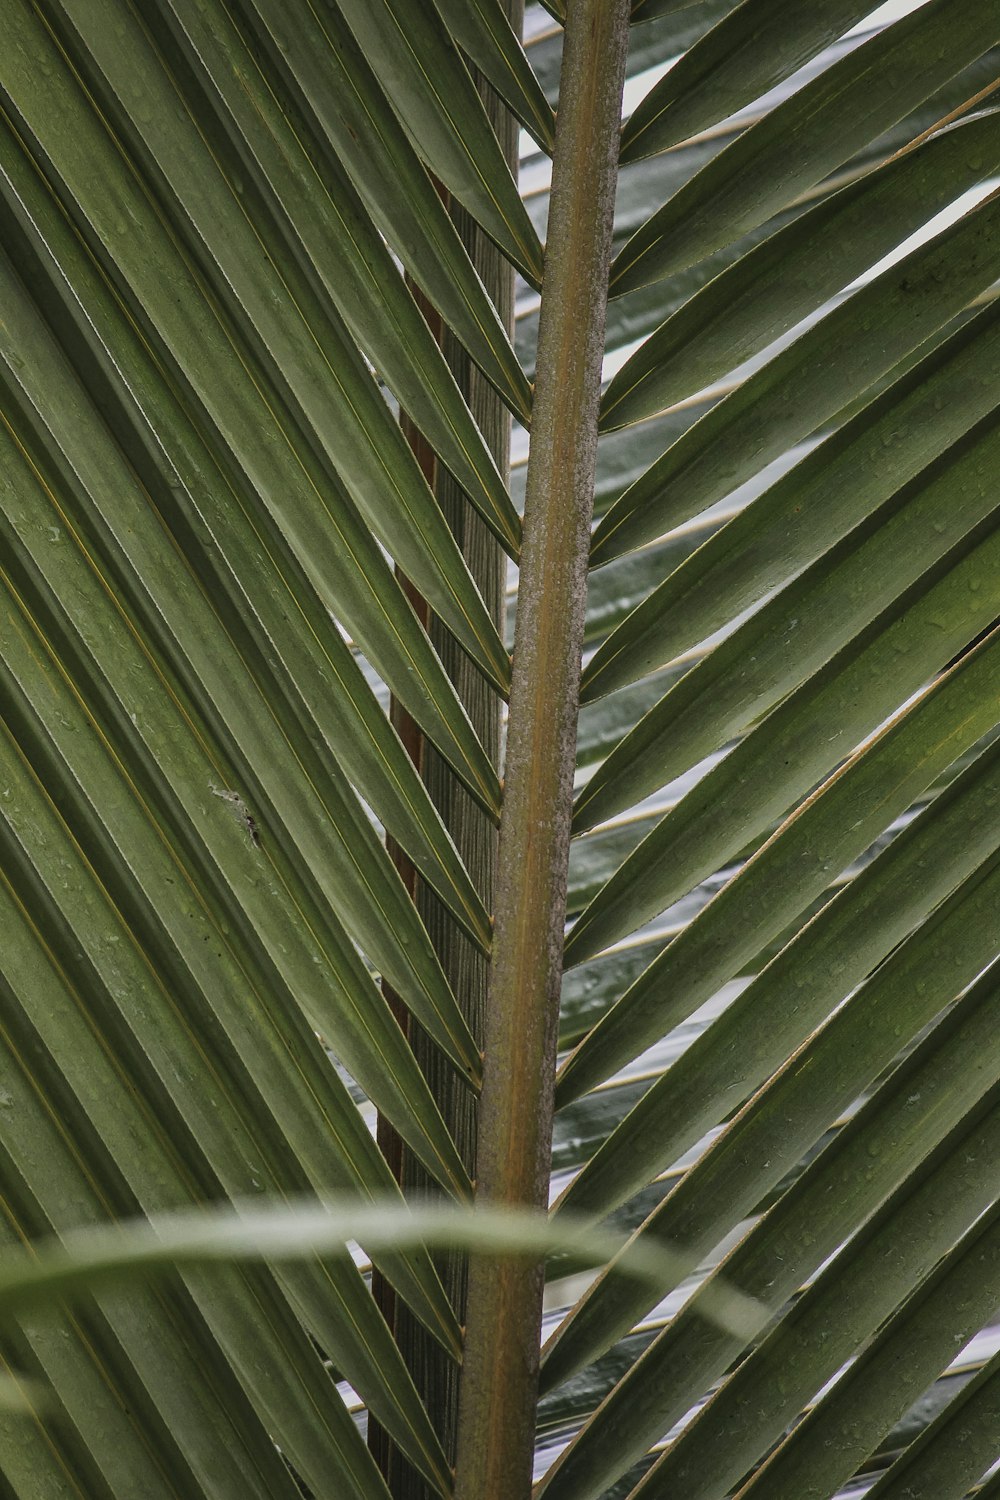 a bird perched on a palm tree branch